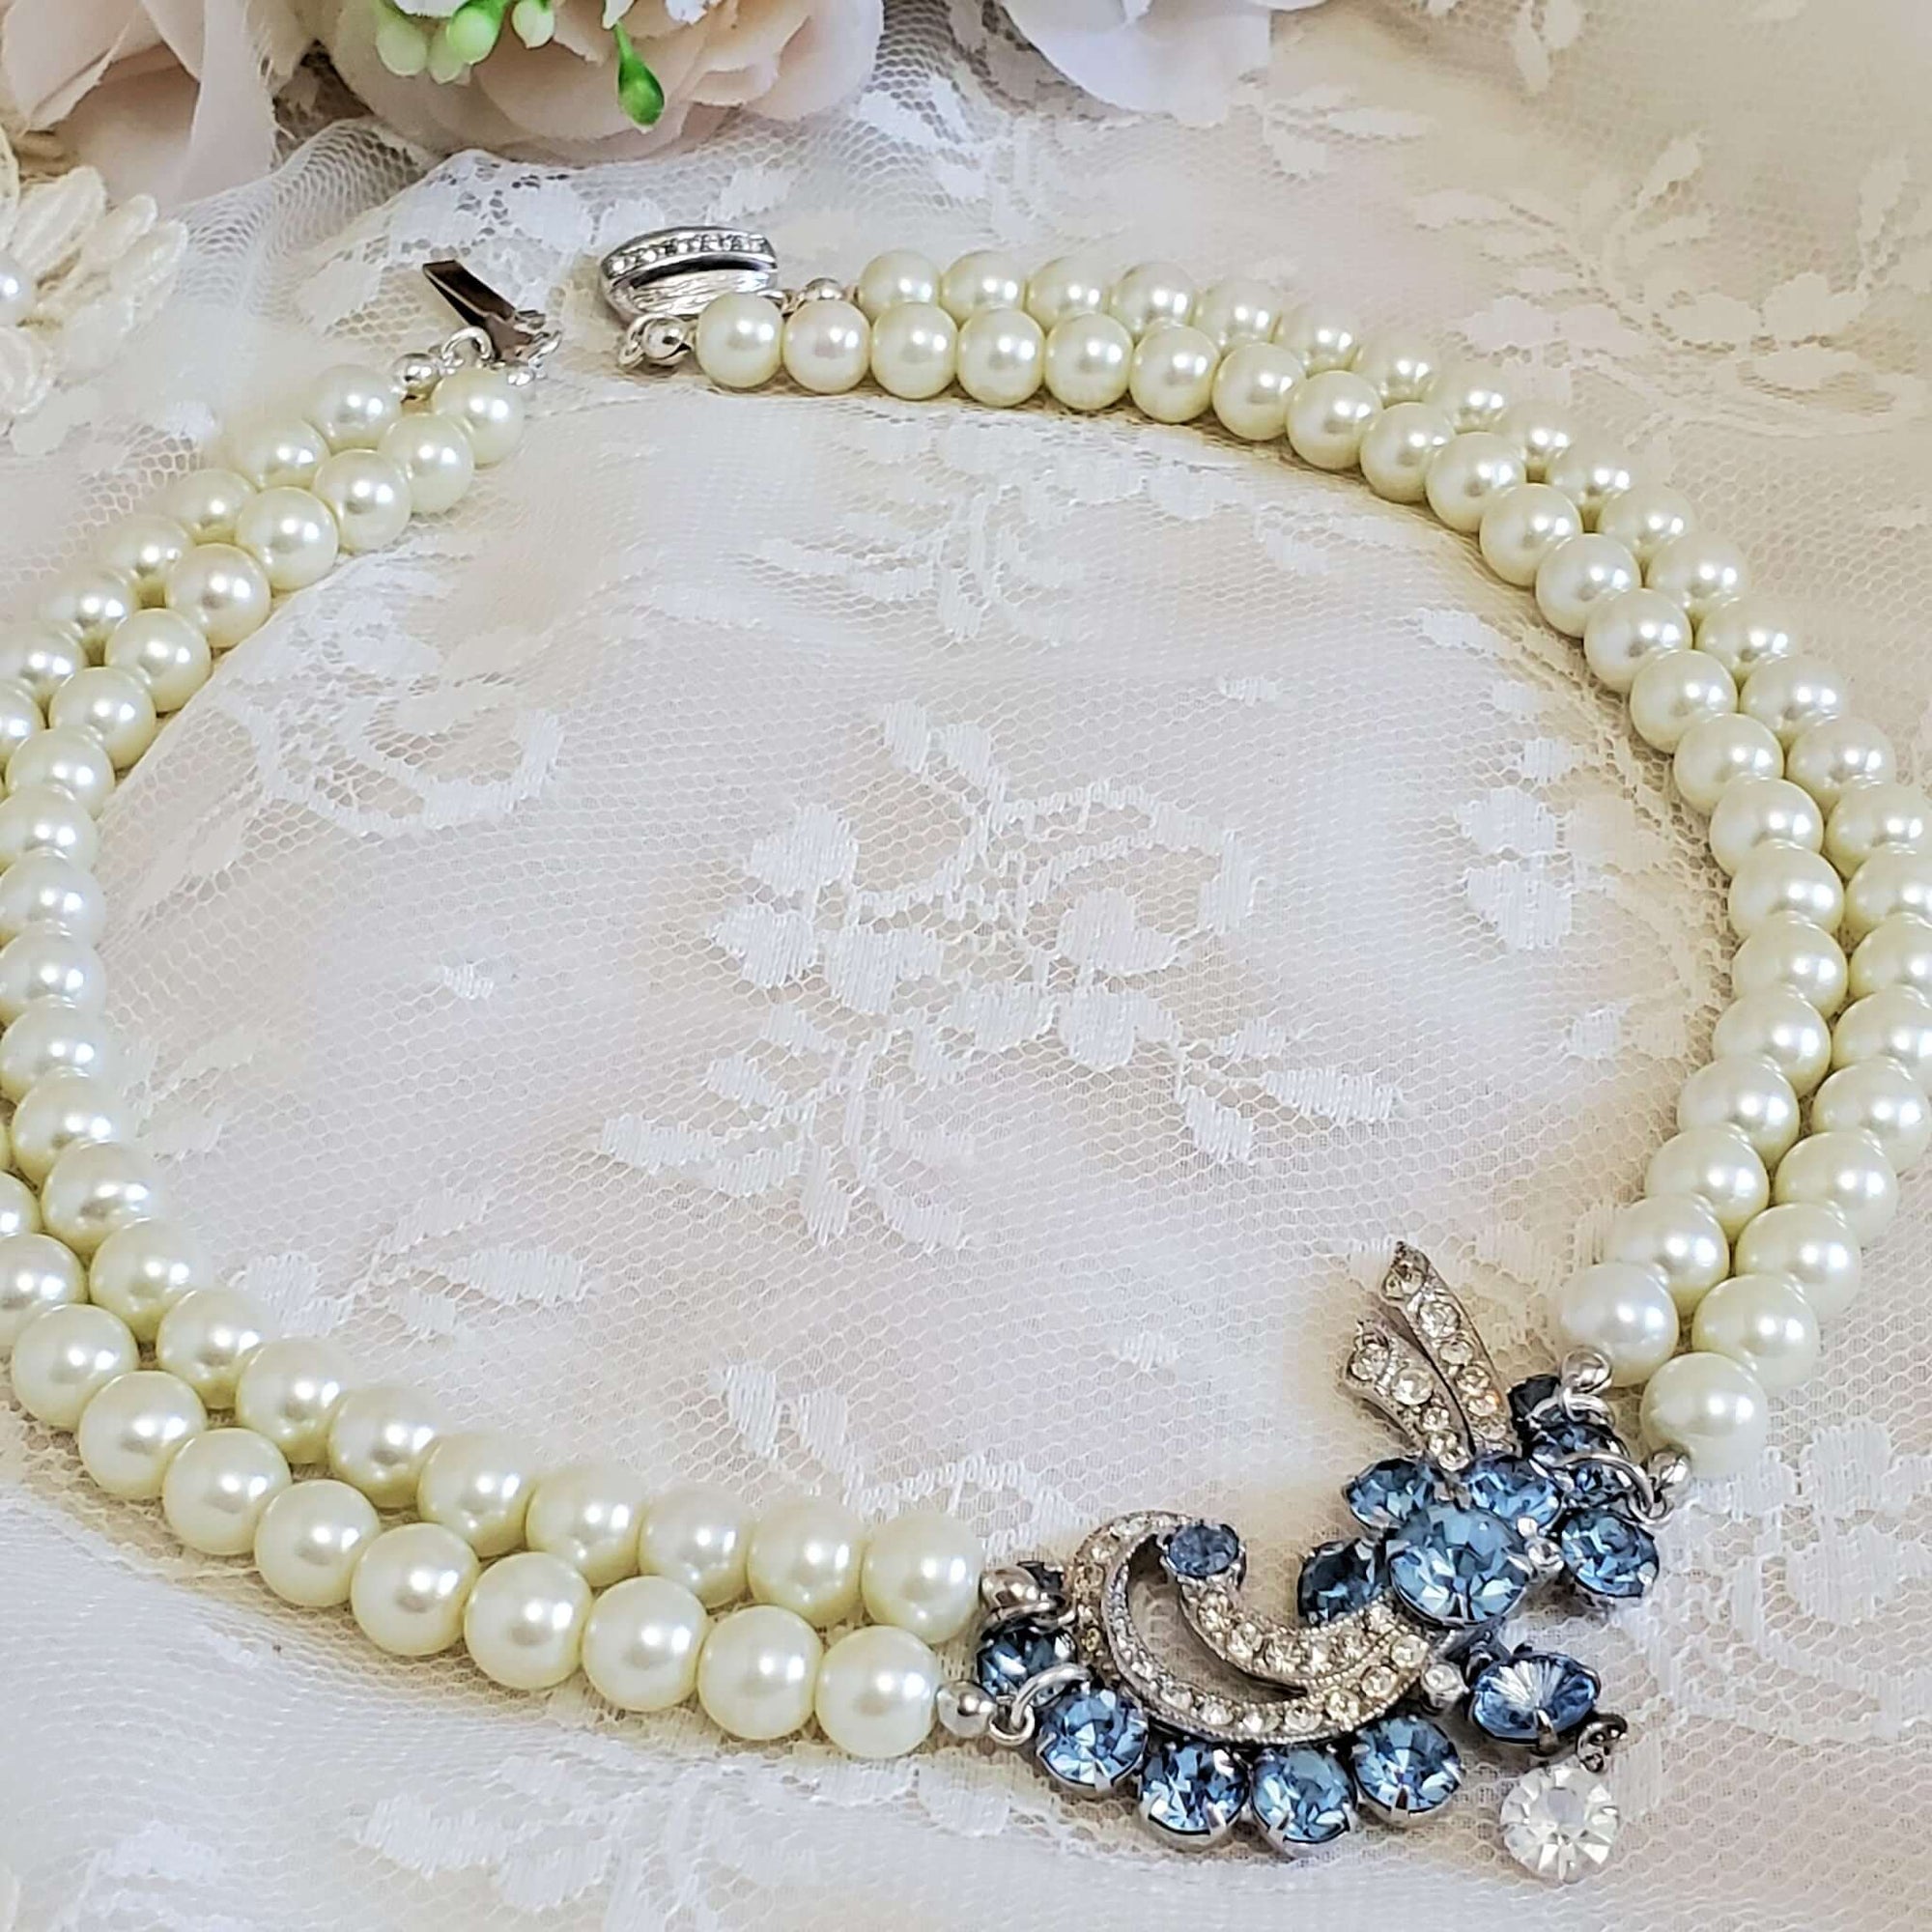 Two Strand Vintage Costume Pearl Necklace with Vintage Blue Crystal Repurposed Brooch Pendant